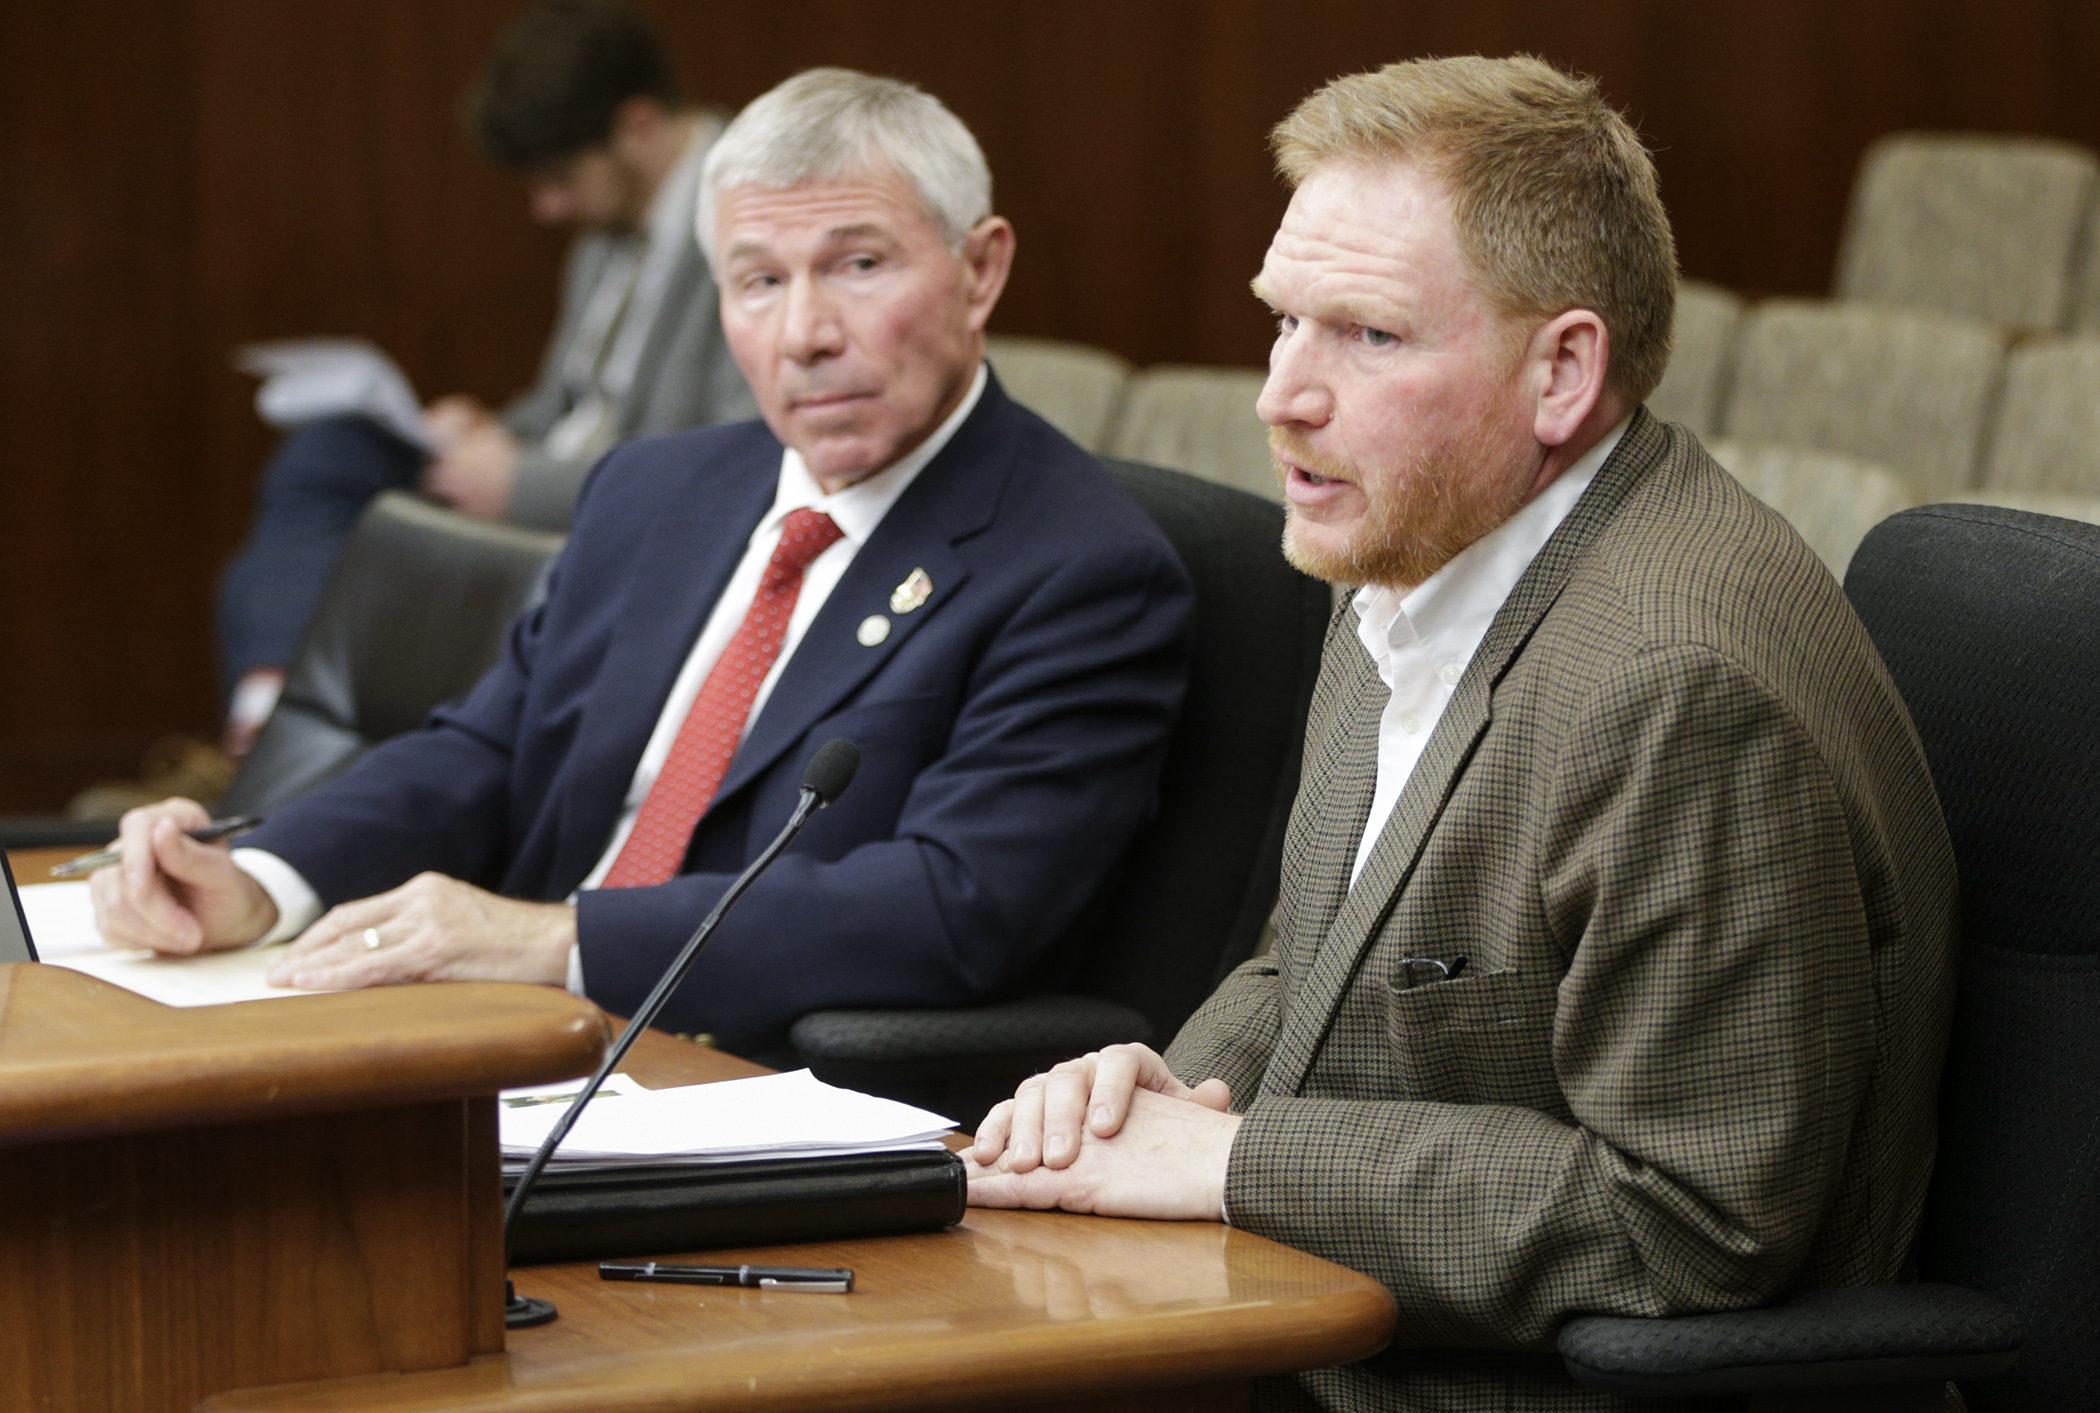 David Kelliher, legislative director for the Minnesota Historical Society, testifies during the House Veterans Affairs Division hearing March 22 on HF4100, sponsored by Rep. Bob Dettmer, left. Photo by Paul Battaglia